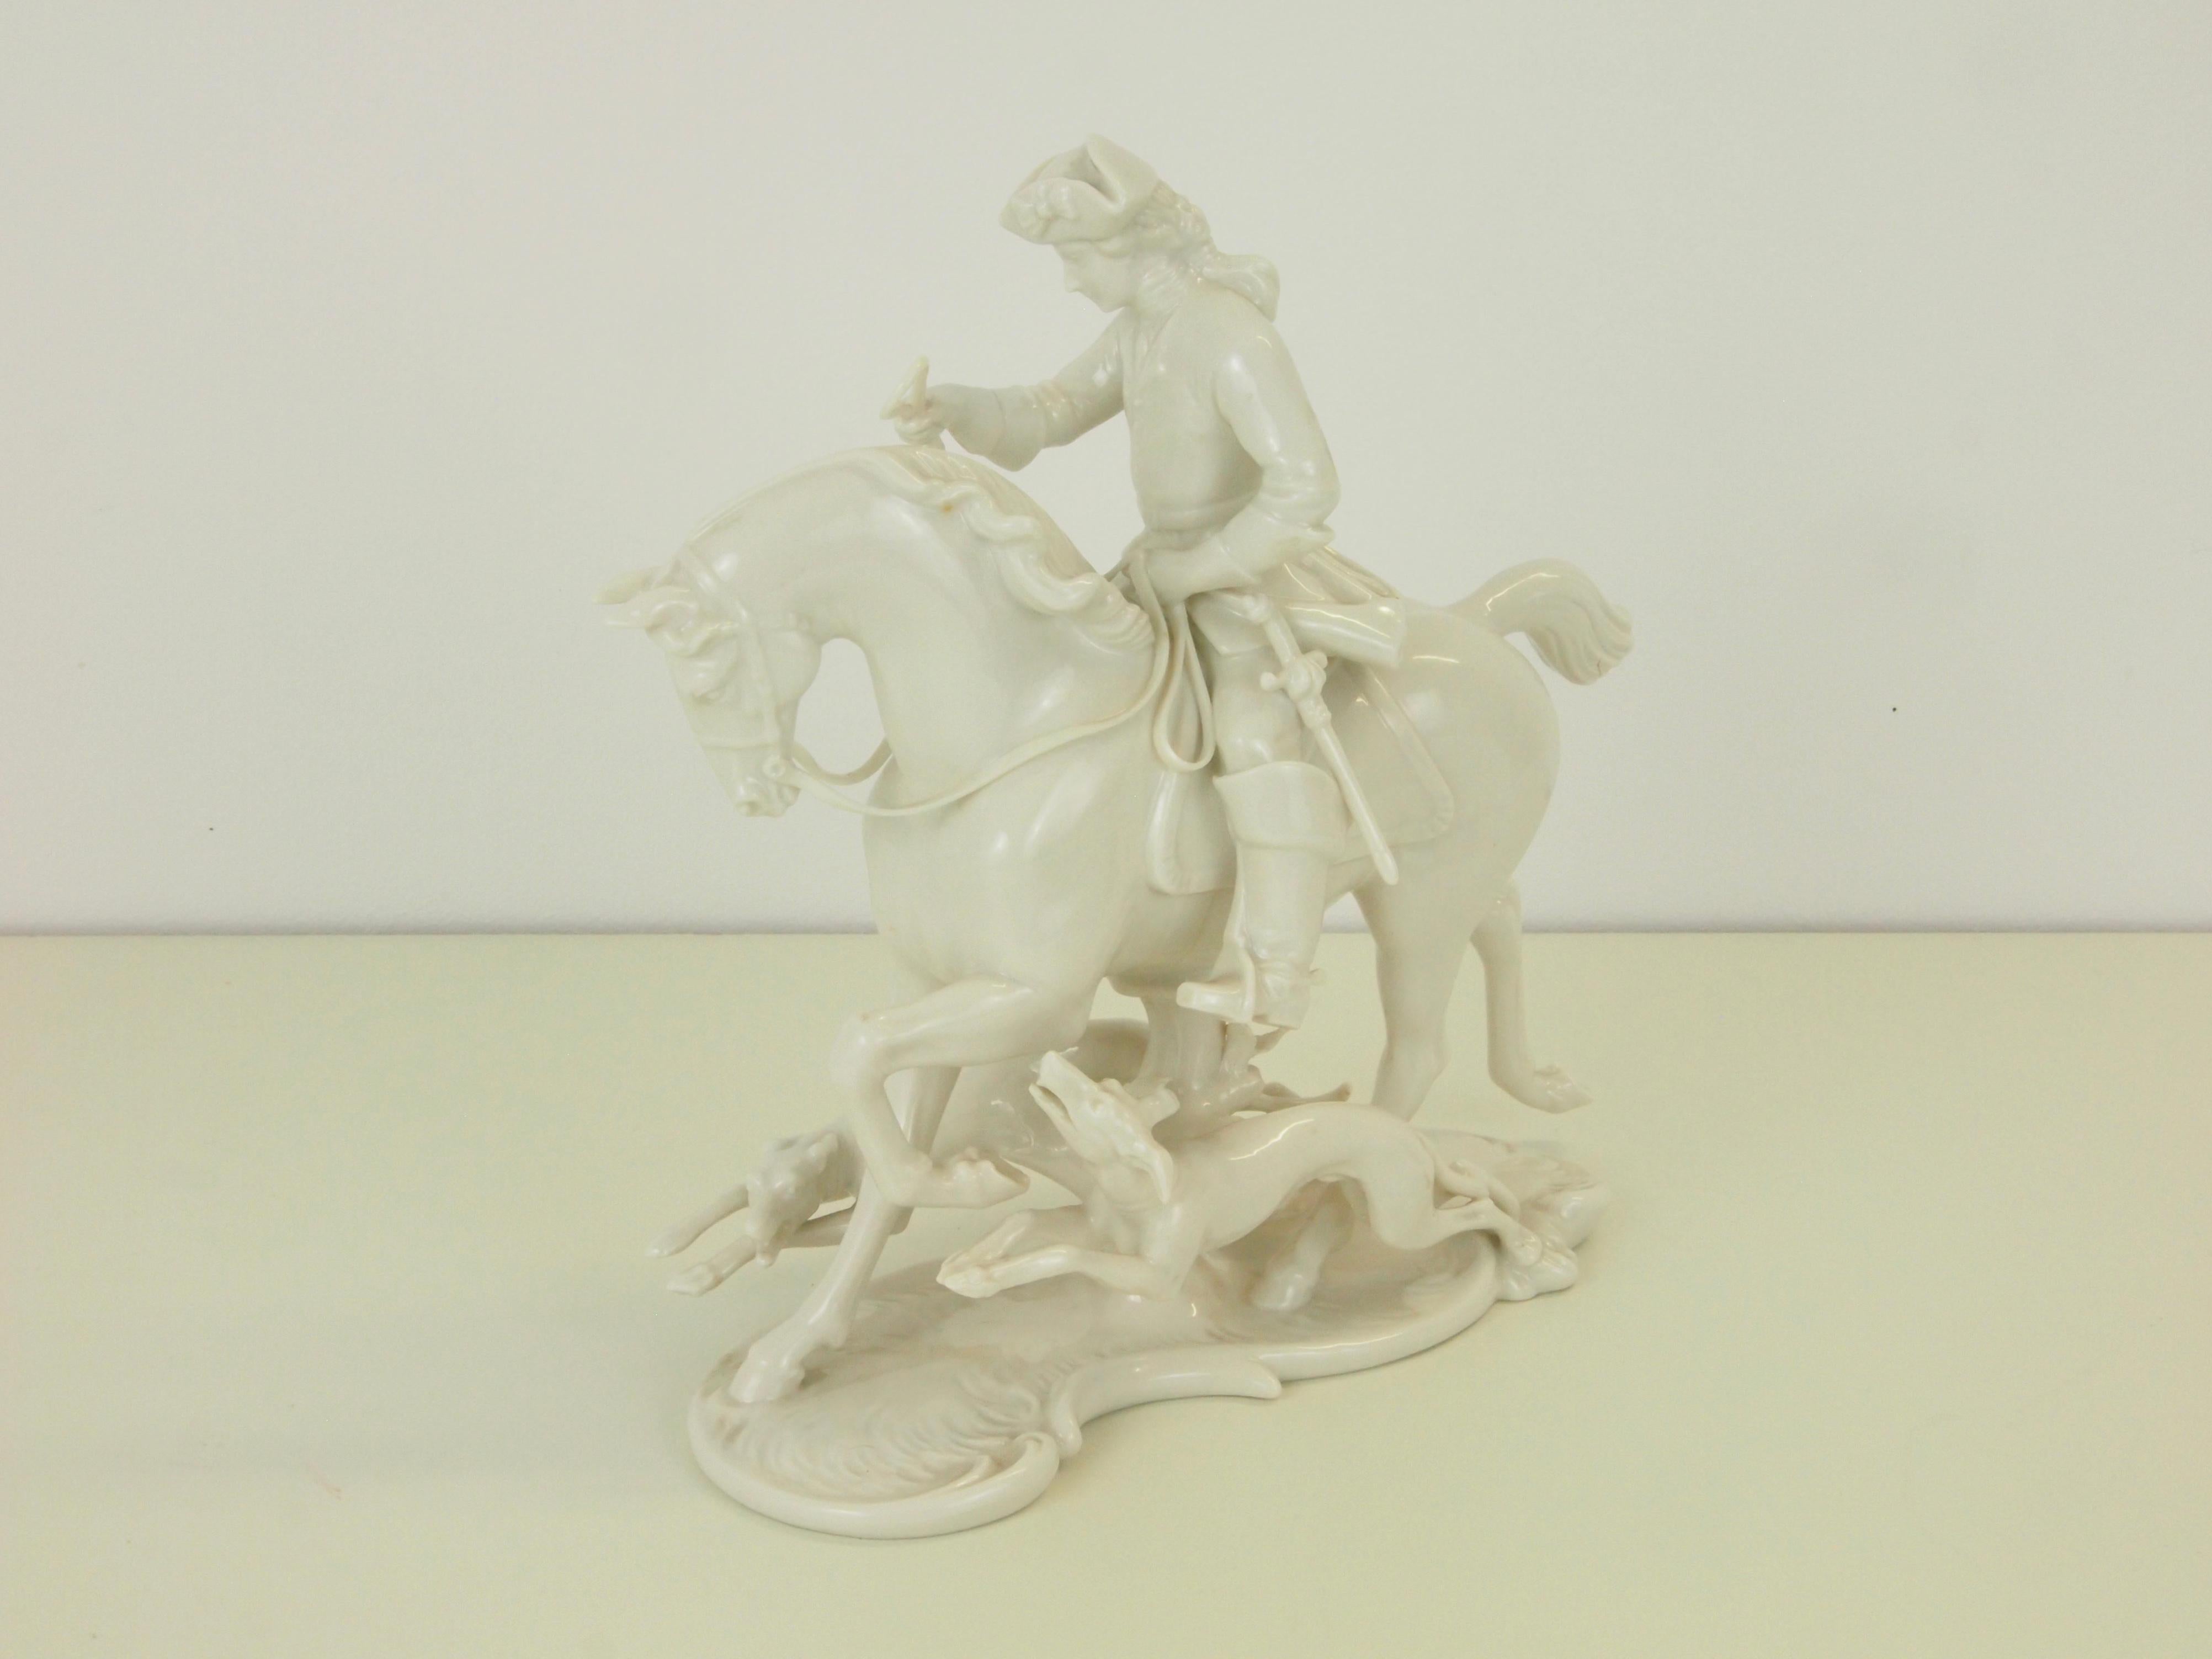 Nymphenburg Porcelain Figurine Depicting a Horse Rider in a Hunting Scene For Sale 9